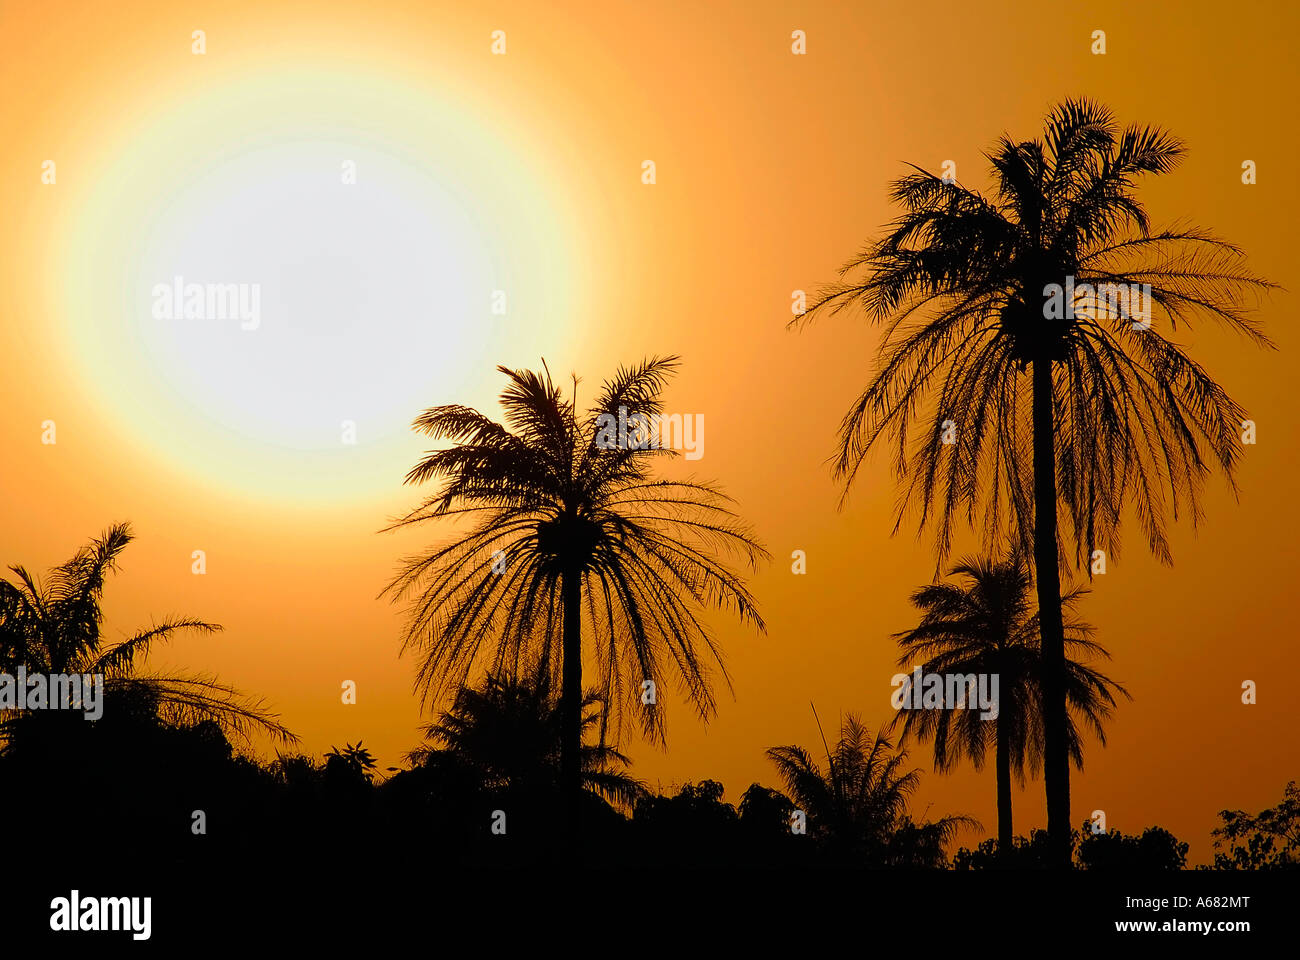 Palm-trees outlined against a sunset sky, The Gambia, Africa Stock Photo